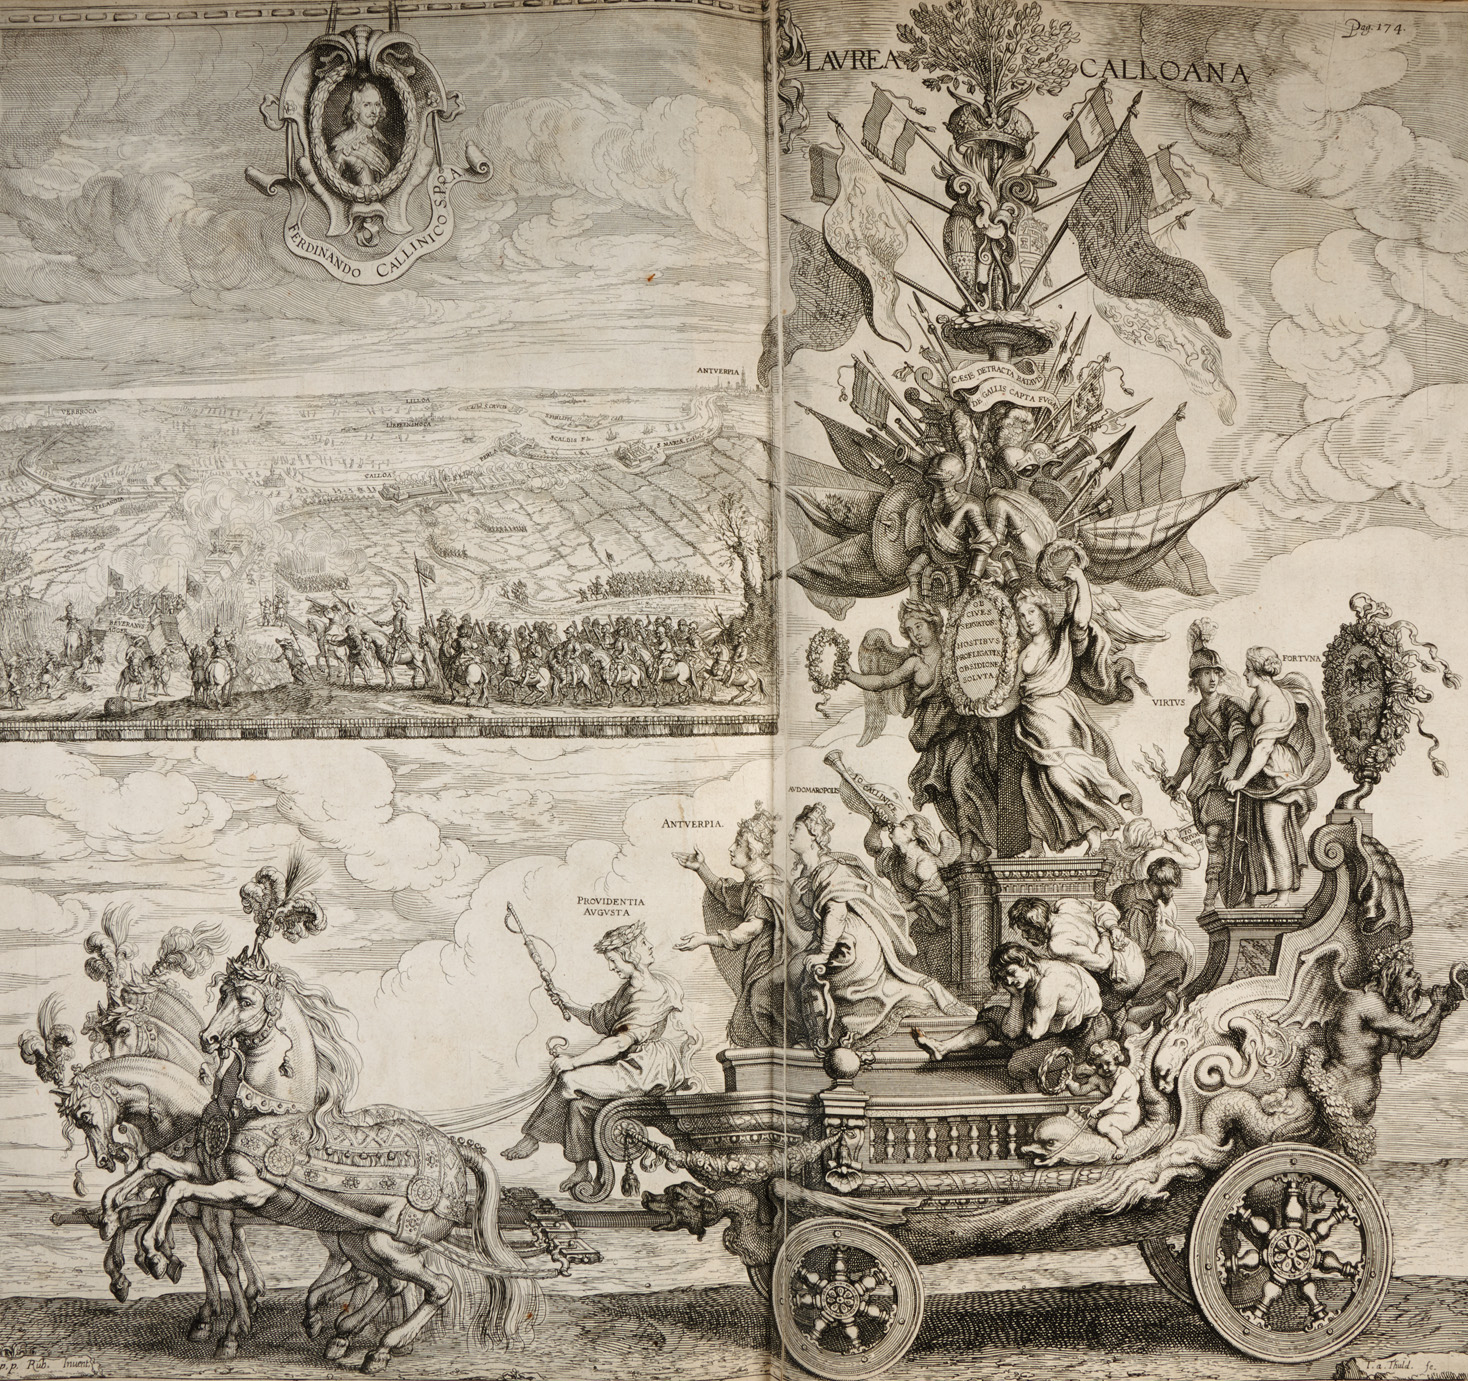 The triumphal entry of Ferdinand of Austria